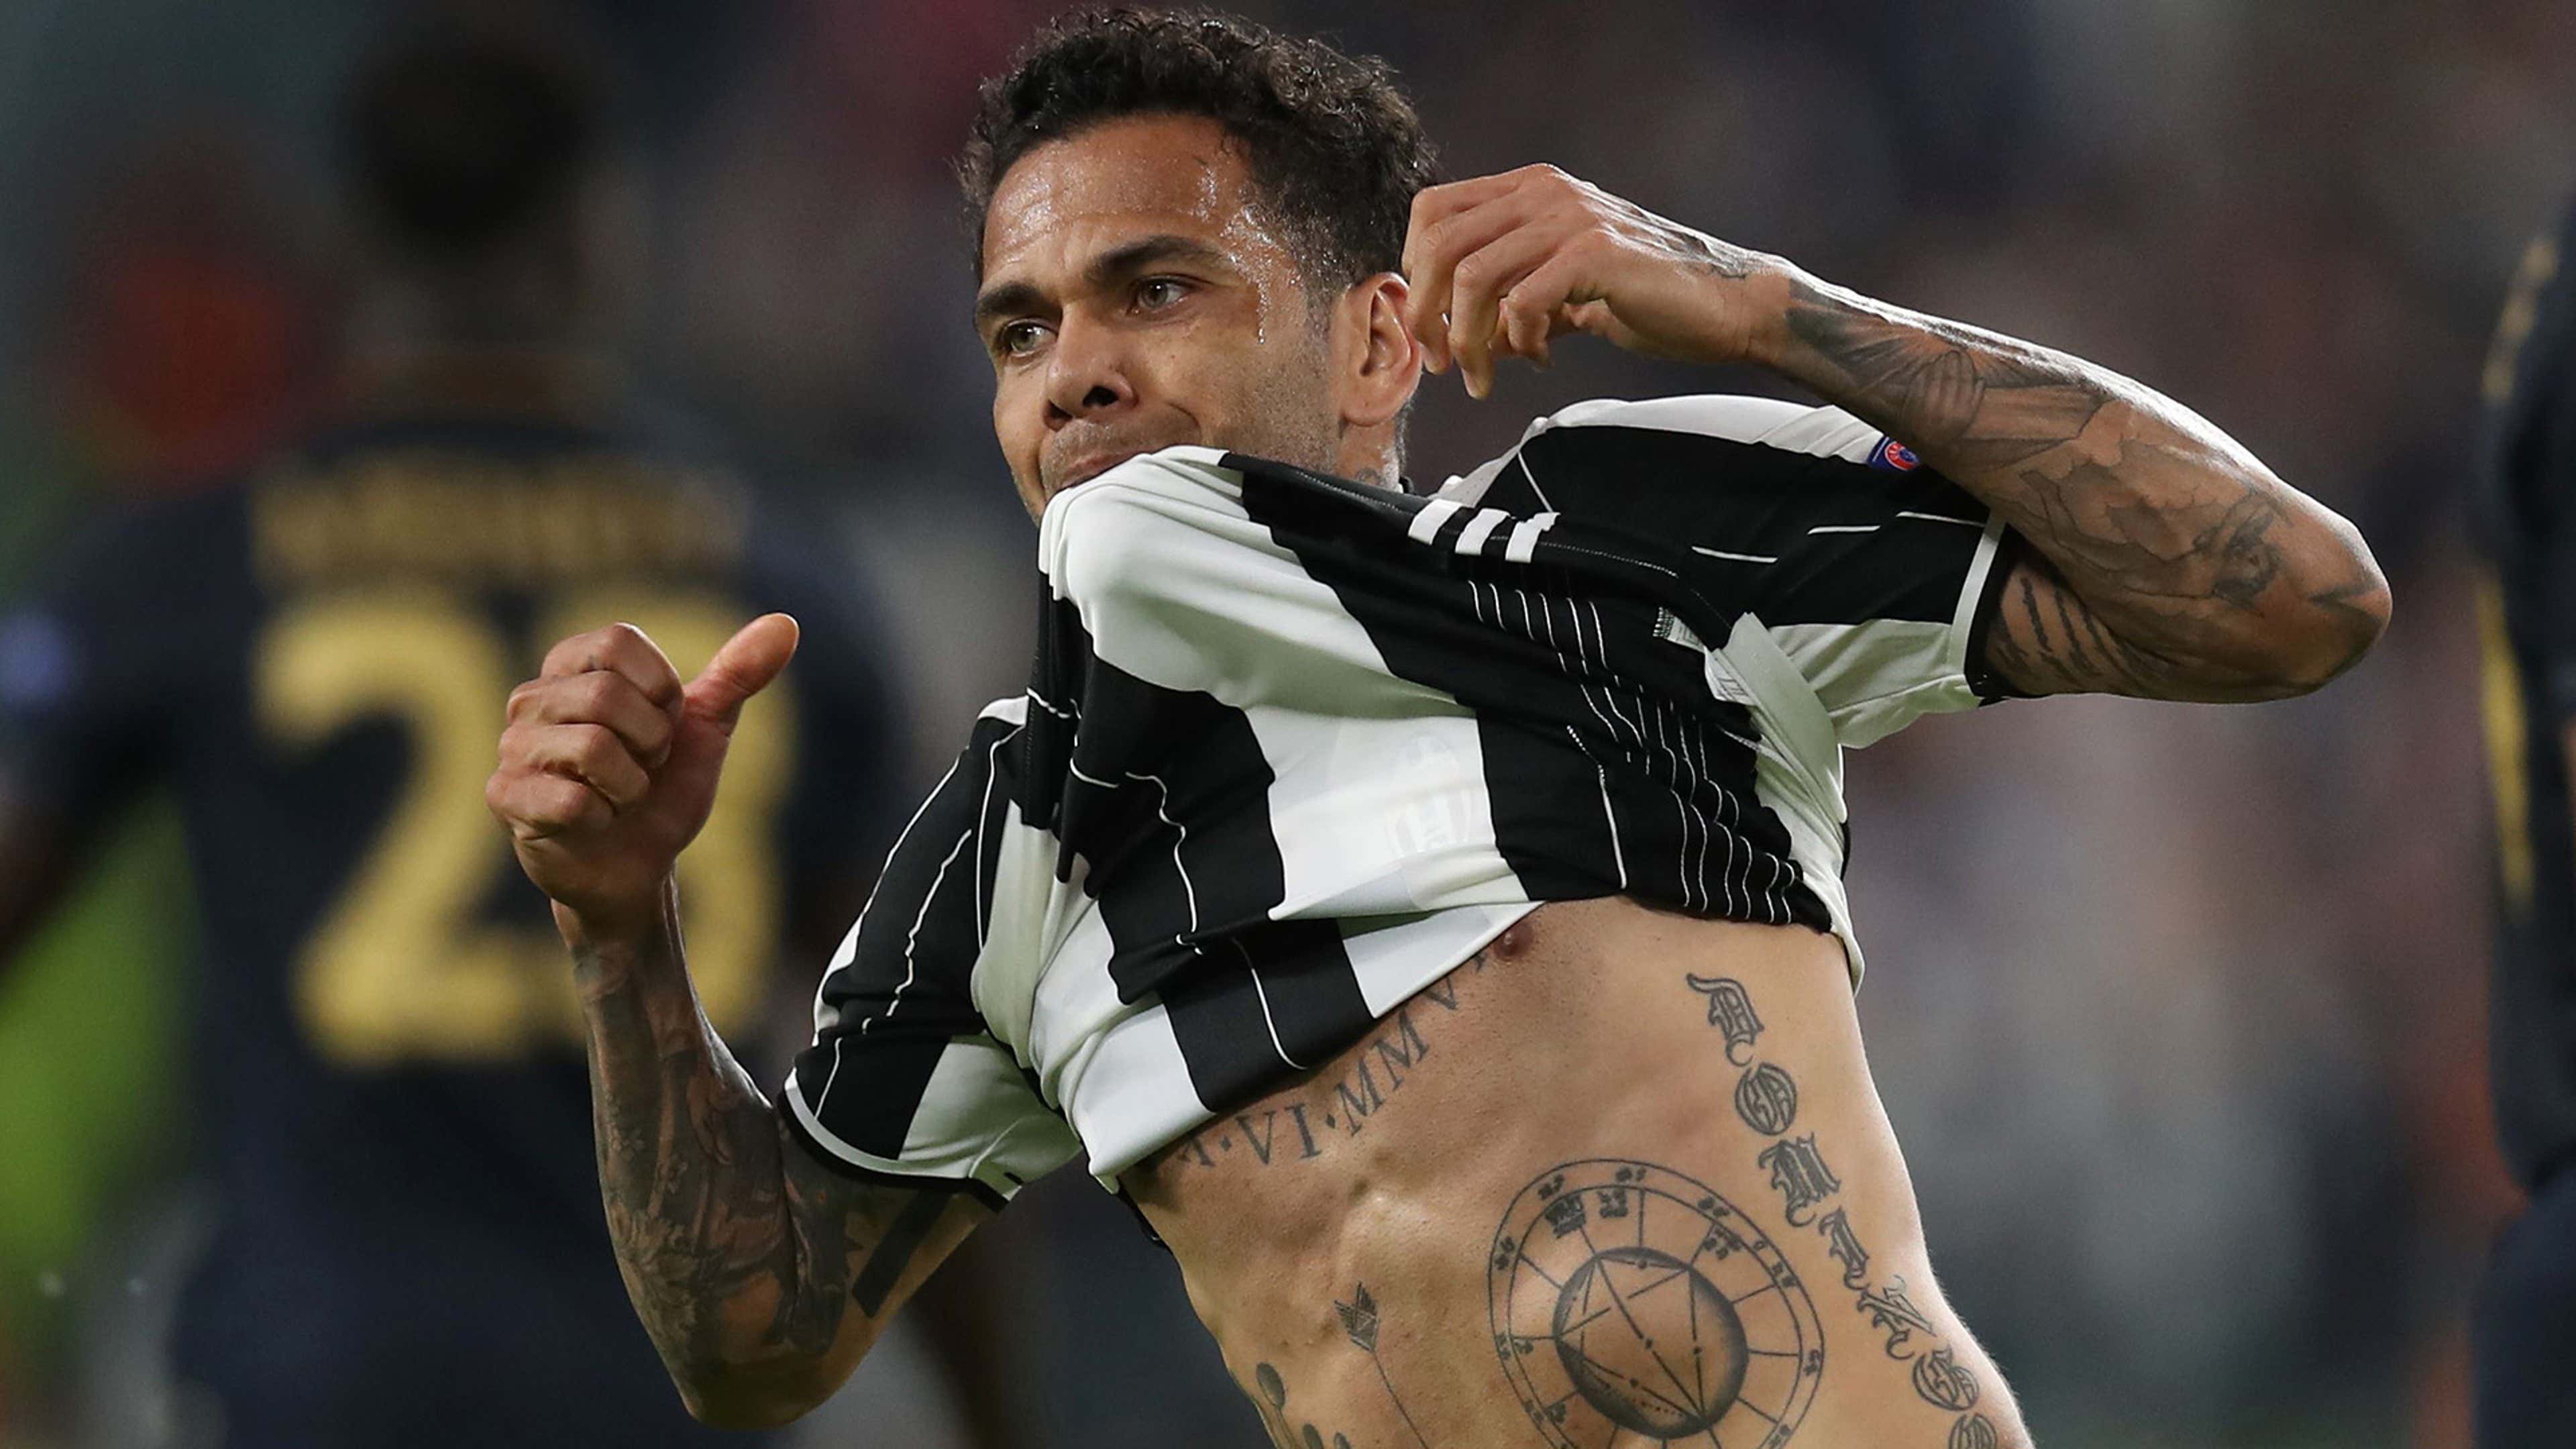 Transfer news: 'I didn't realise Manchester had two teams' - Comments City  target Alves may live to regret  Uganda